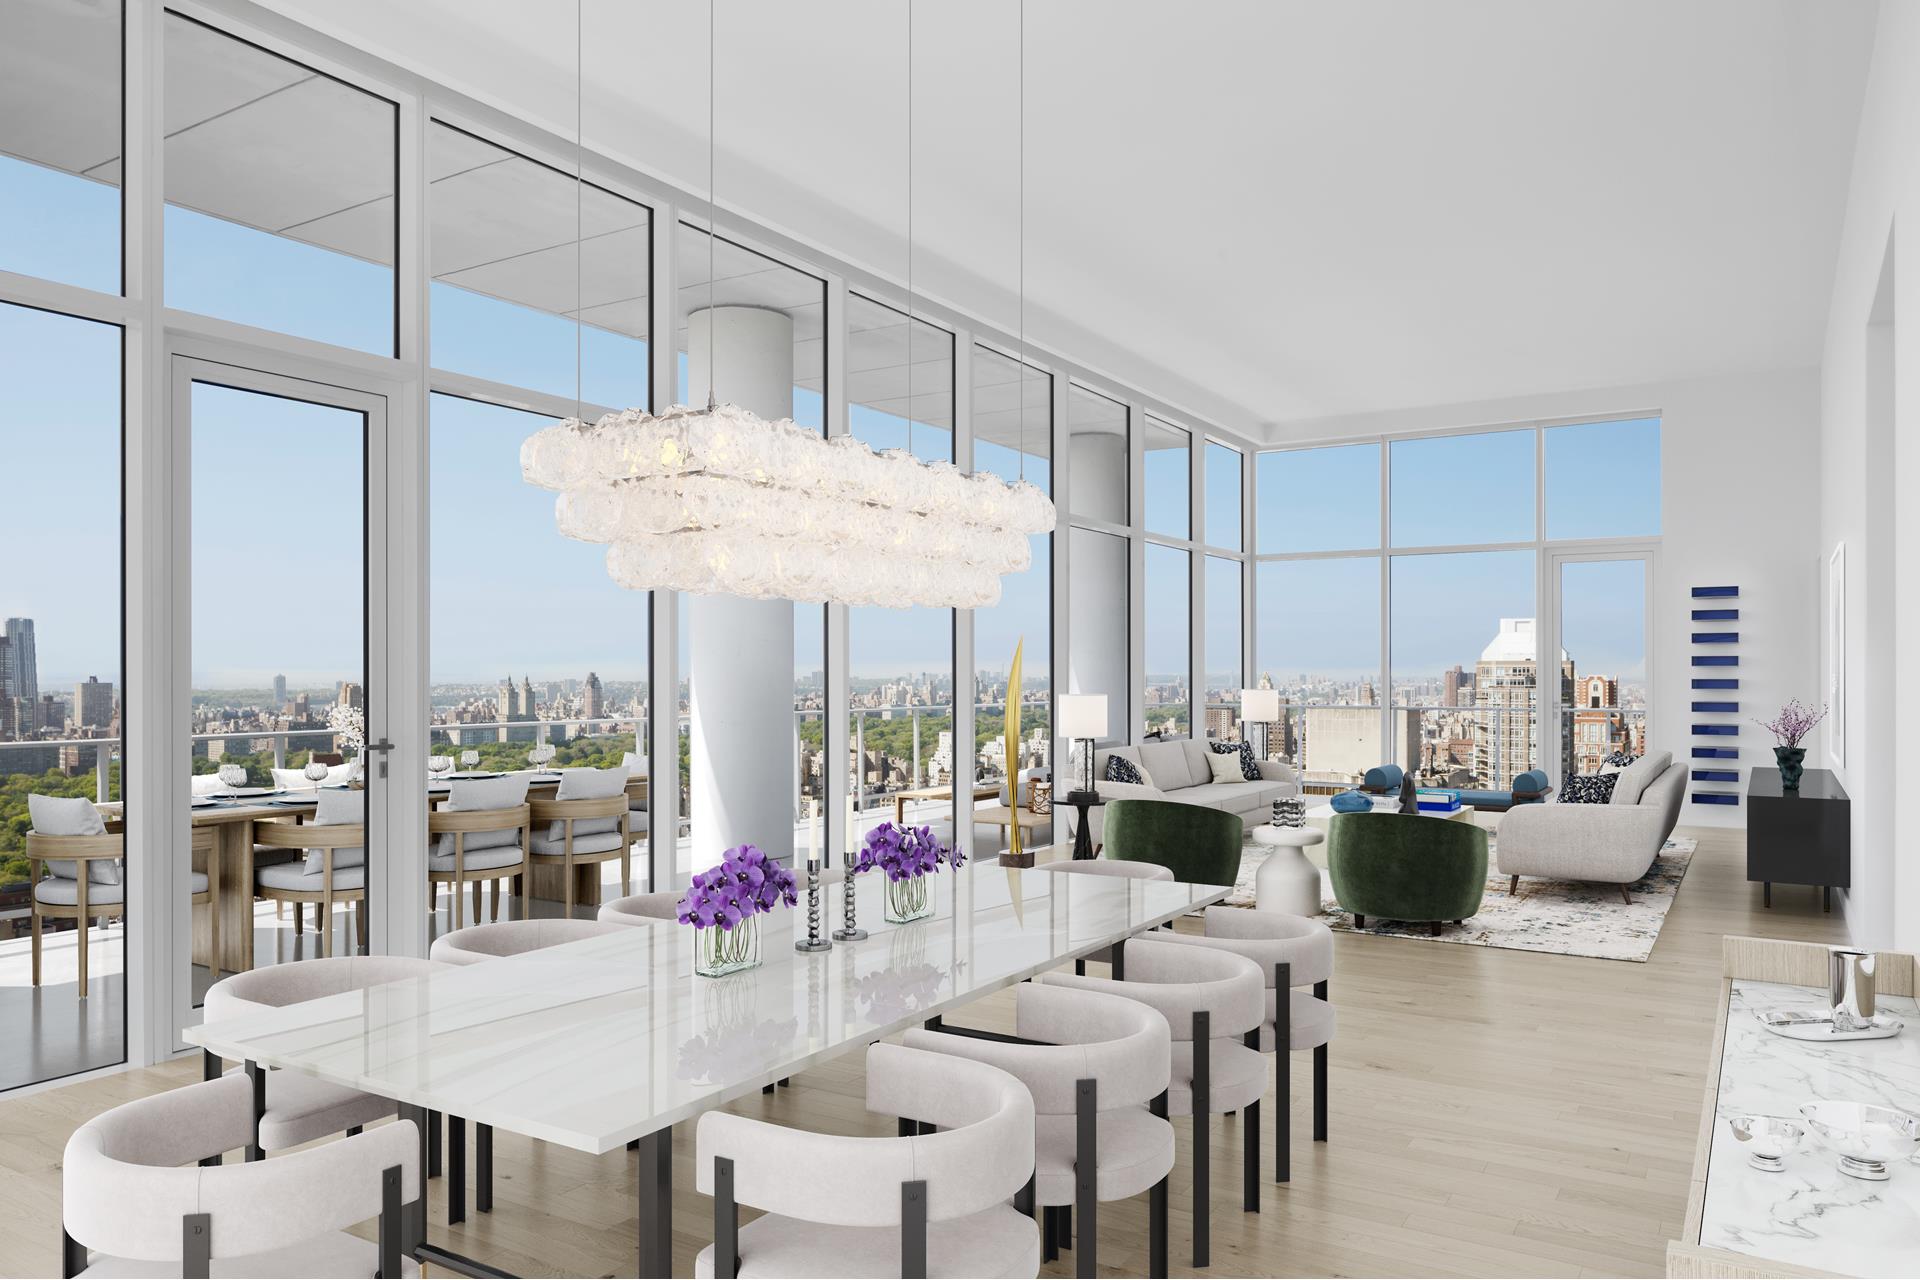 200 East 59th Street Ph33/34, Sutton Place, Midtown East, NYC - 4 Bedrooms  
4.5 Bathrooms  
8 Rooms - 